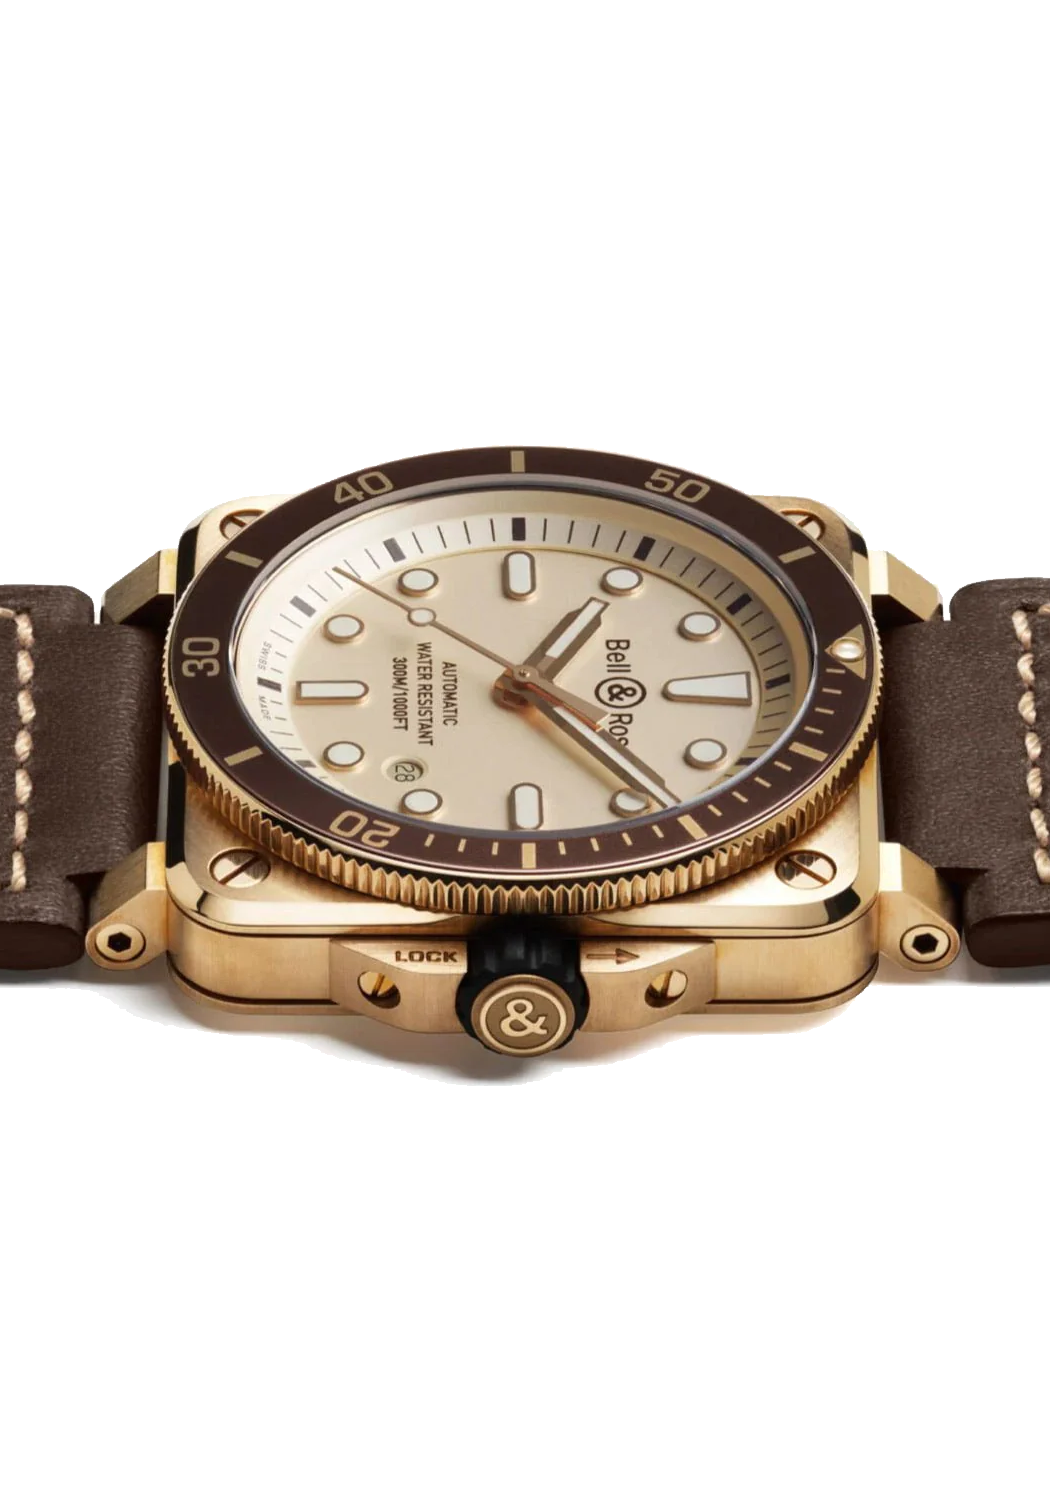 Bell & Ross BR 03-92 Diver White Bronze | OsterJewelers.com